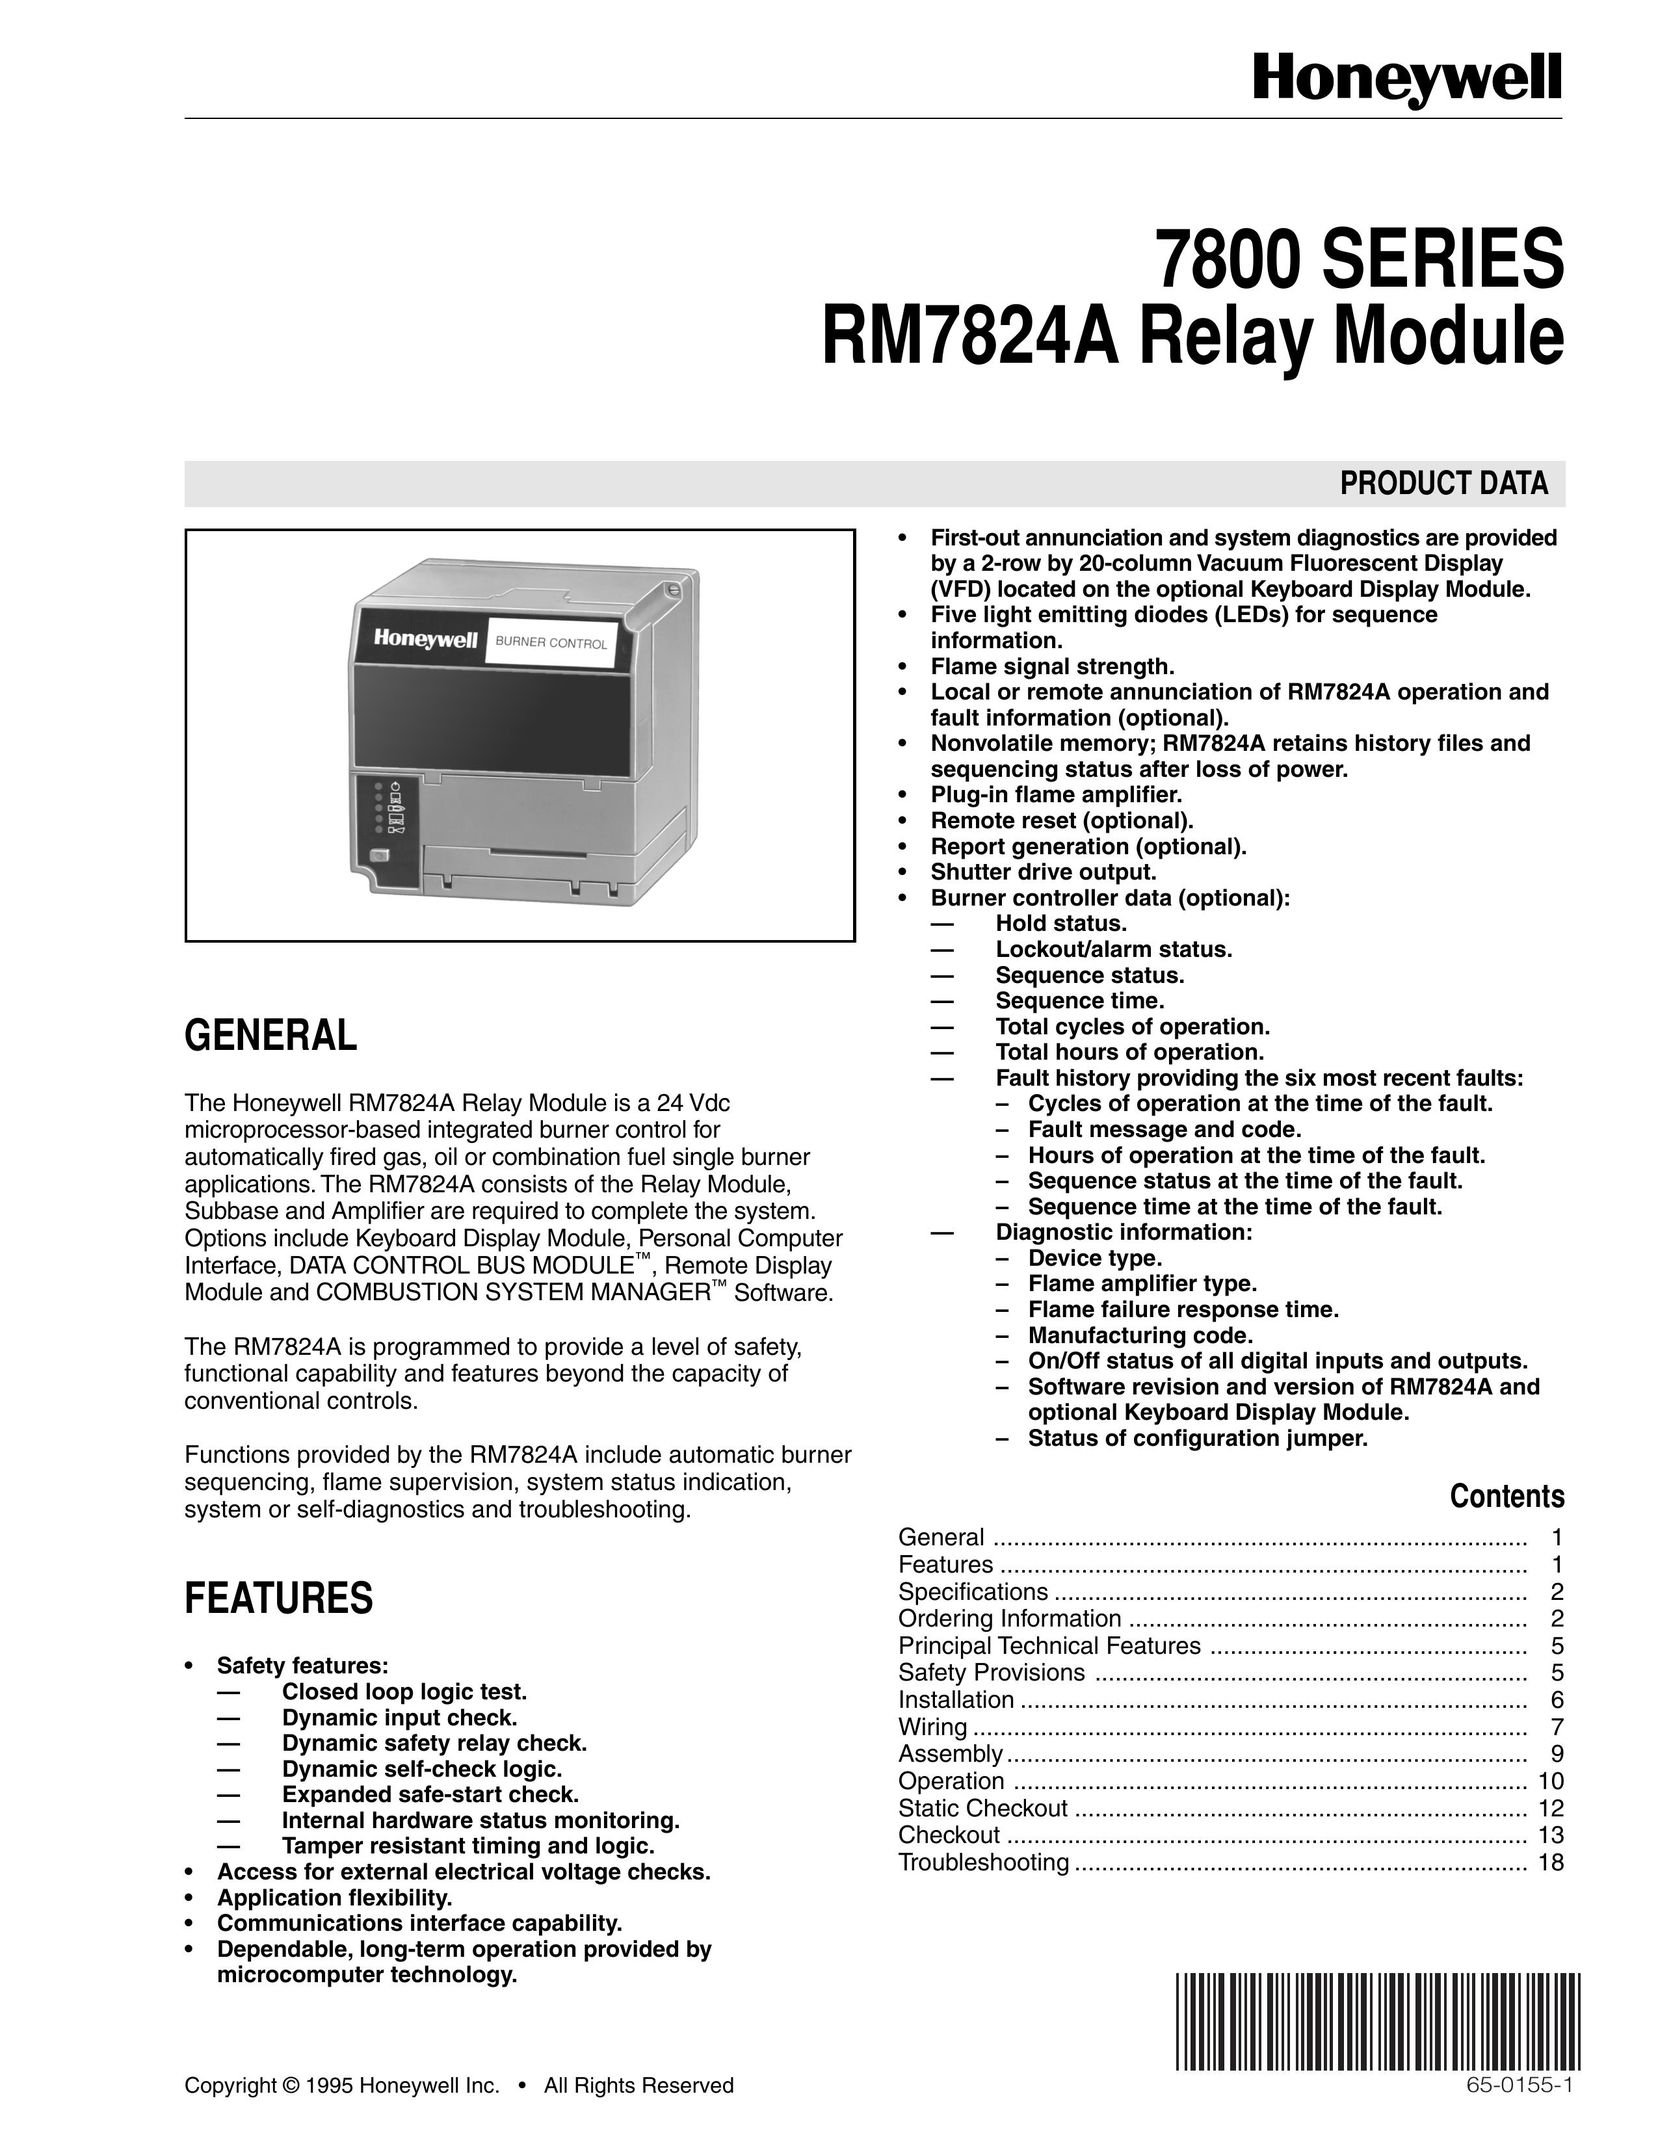 Honeywell RM7824A Stereo System User Manual